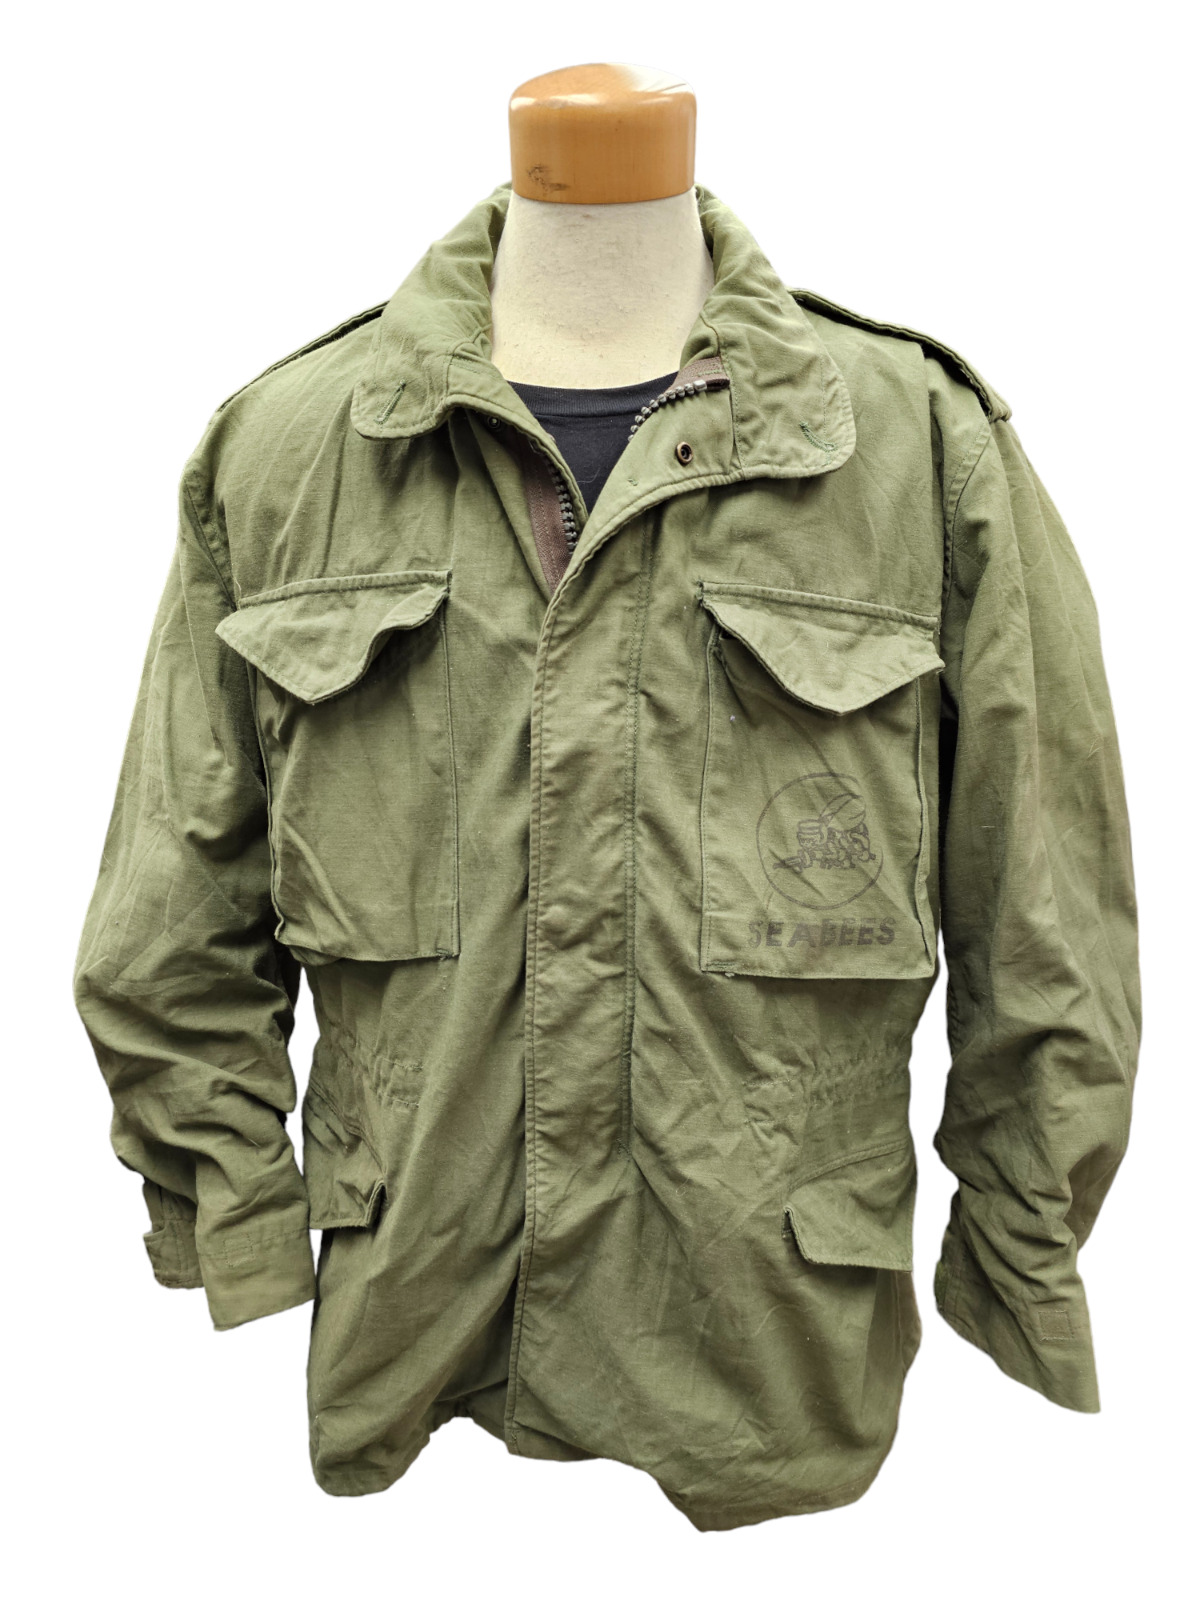 U.S. Armed Forces Sea Bees M65 Field Jacket